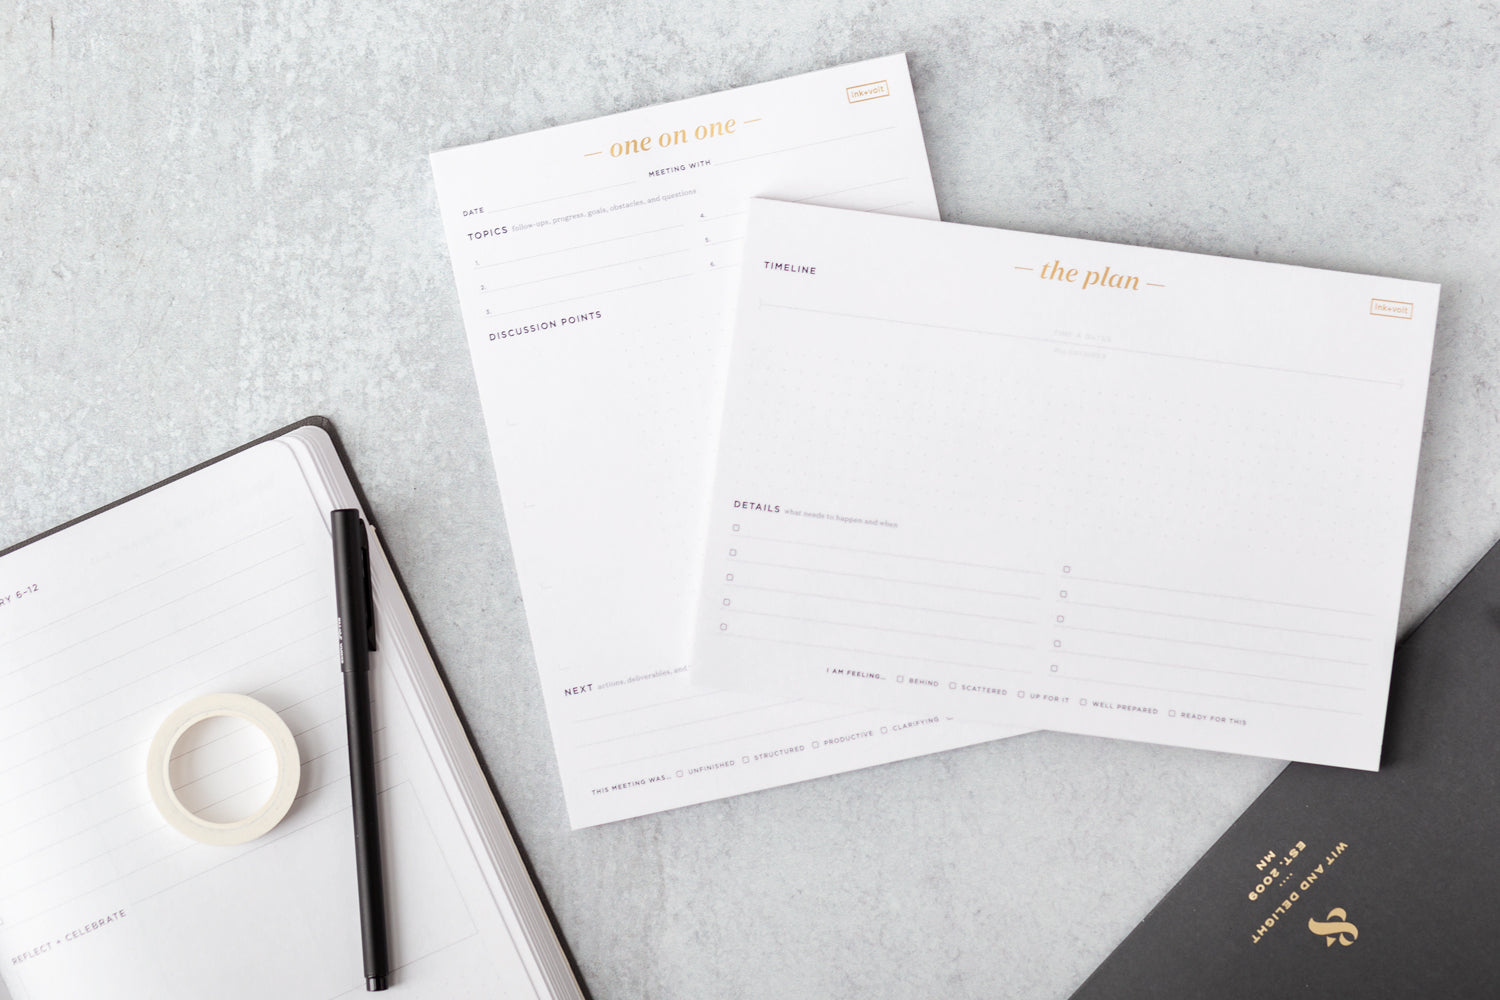 A one-on-one pad and a planning pad sit on a table next to an executive planner and pen.